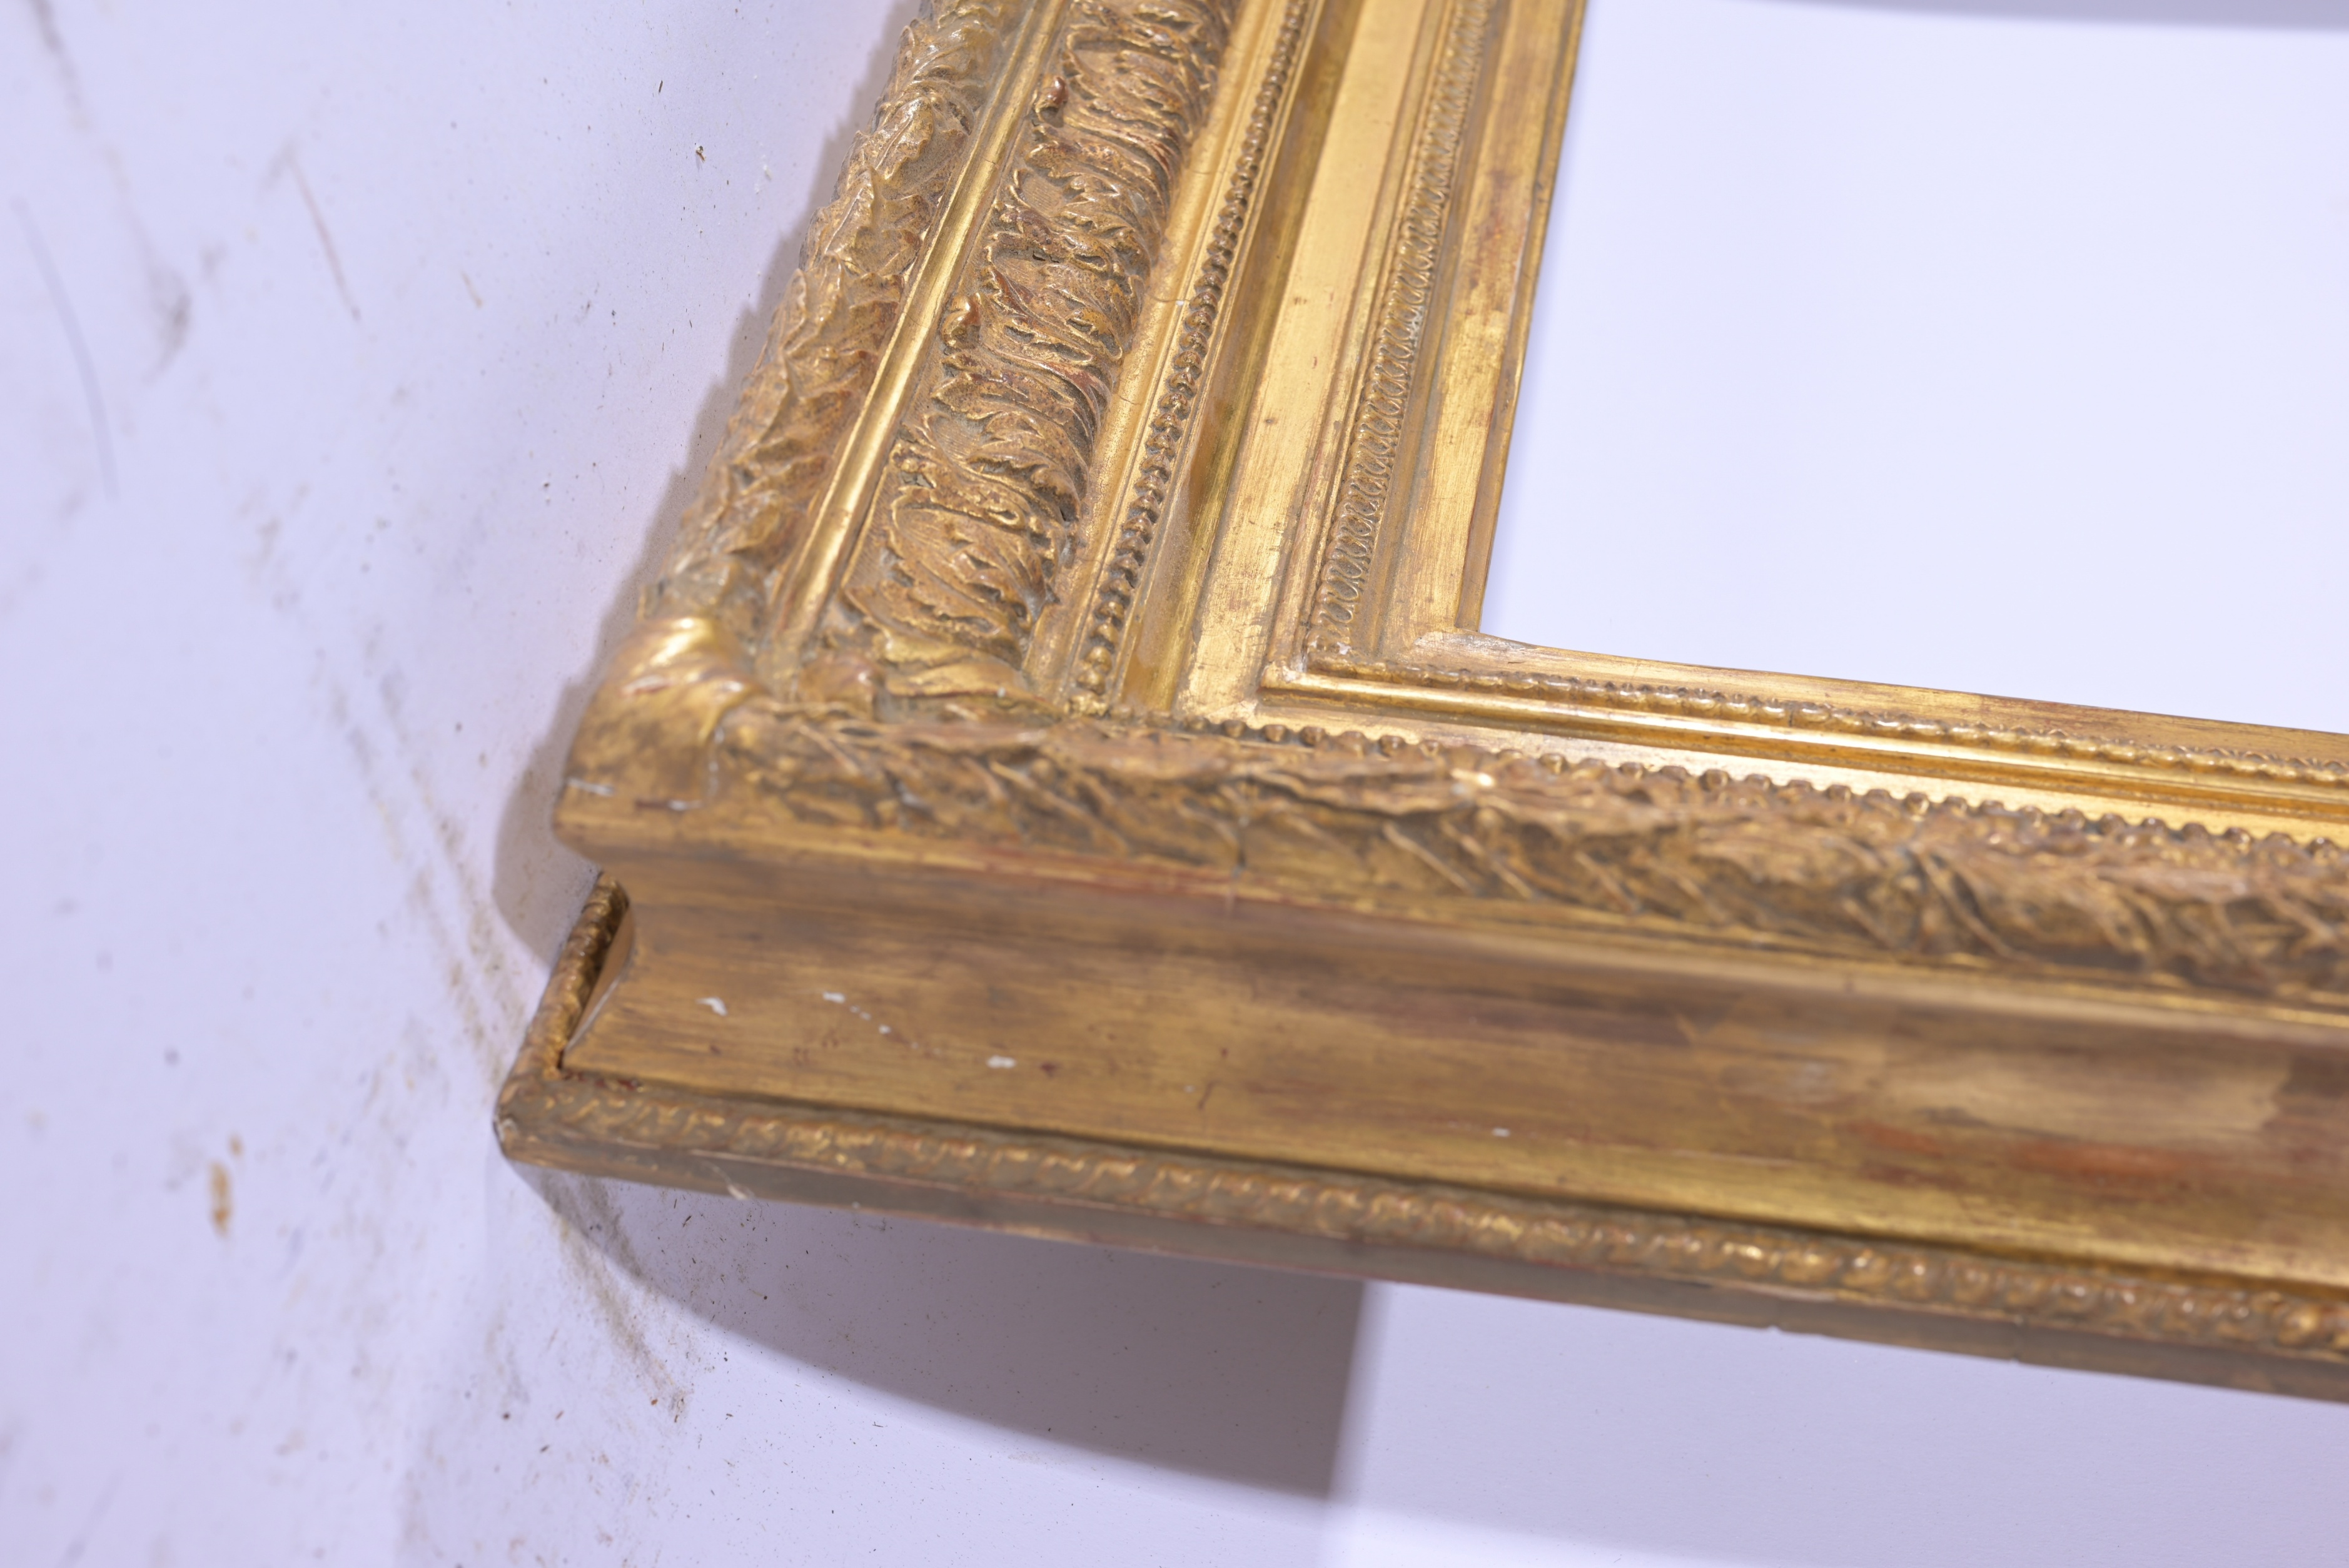 French,19th century Gilt Wood Frame - 28 x 18 - Image 7 of 9